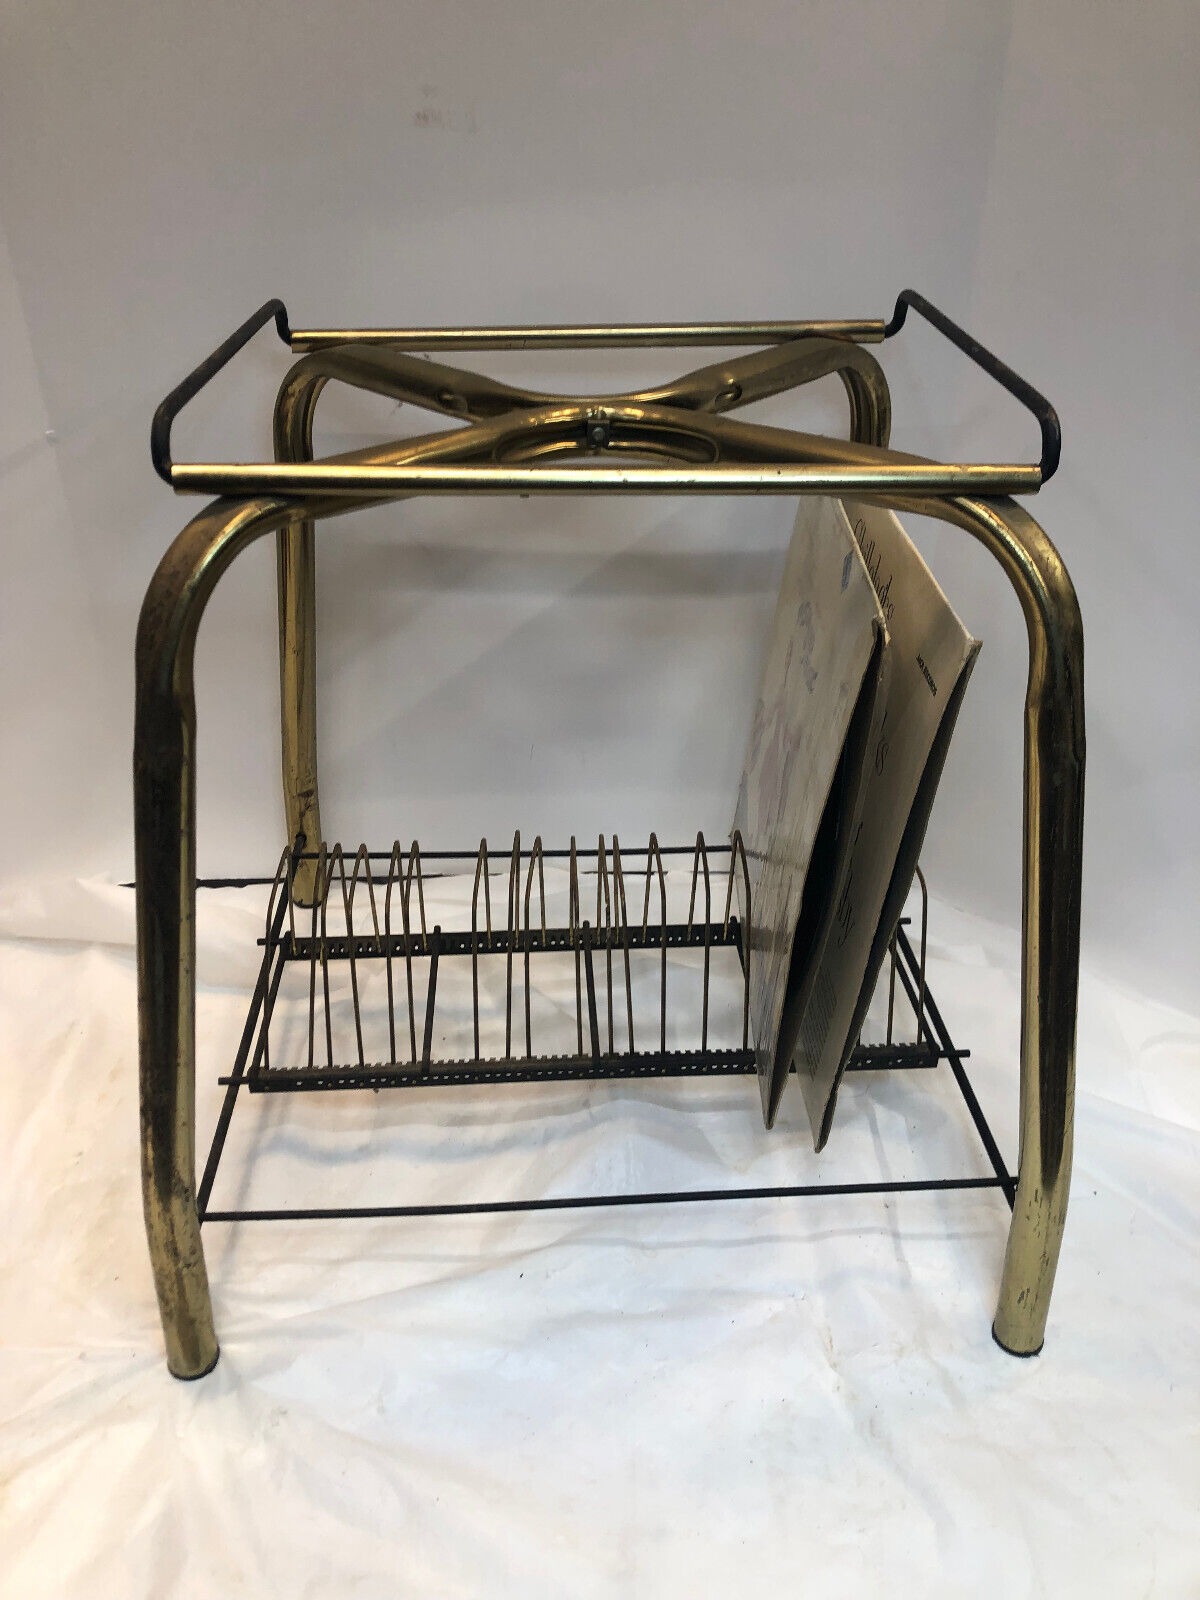 Vintage Record Player Stand Rack - Gold Adjustable Top MCM Mid Century